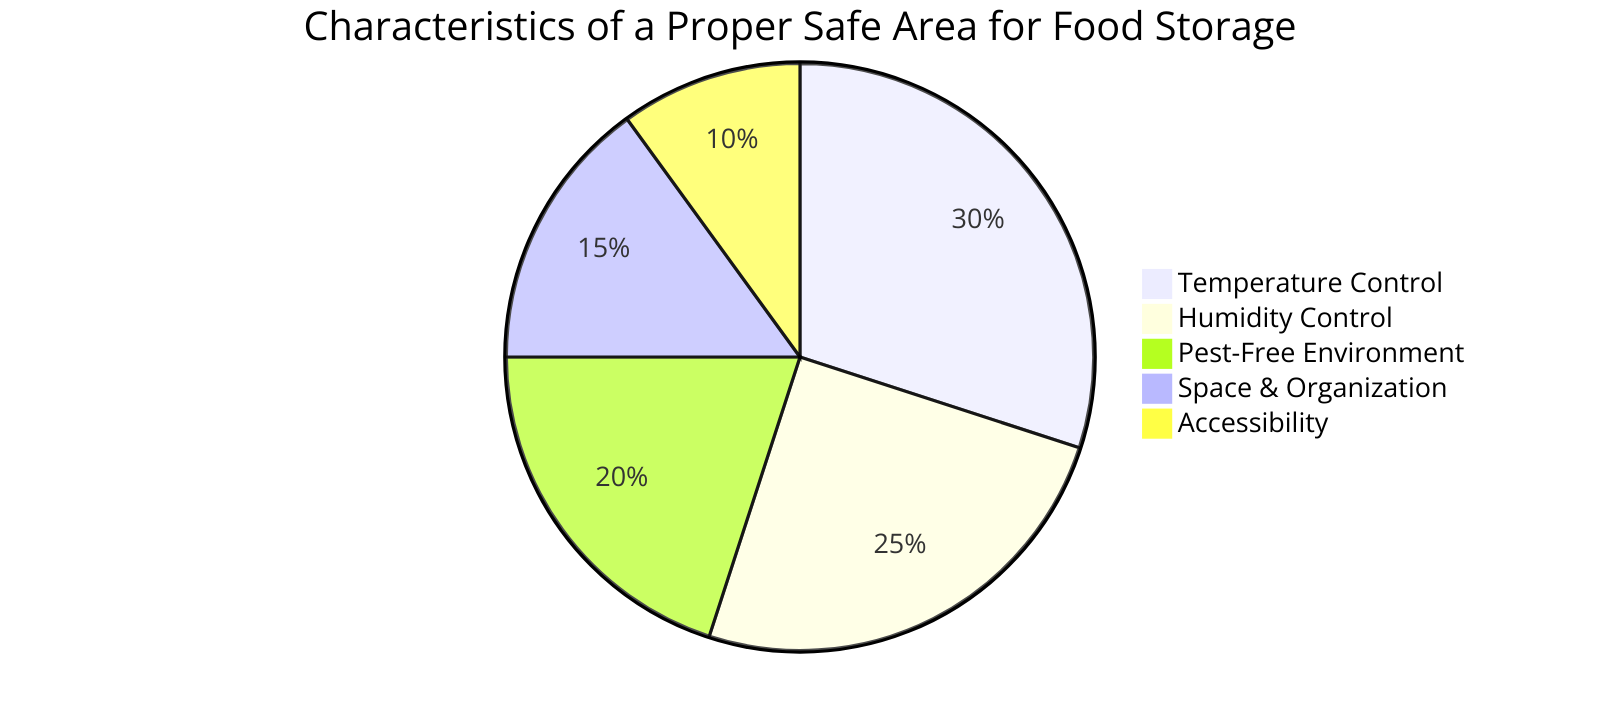 the most important characteristics of a proper safe area for food storage